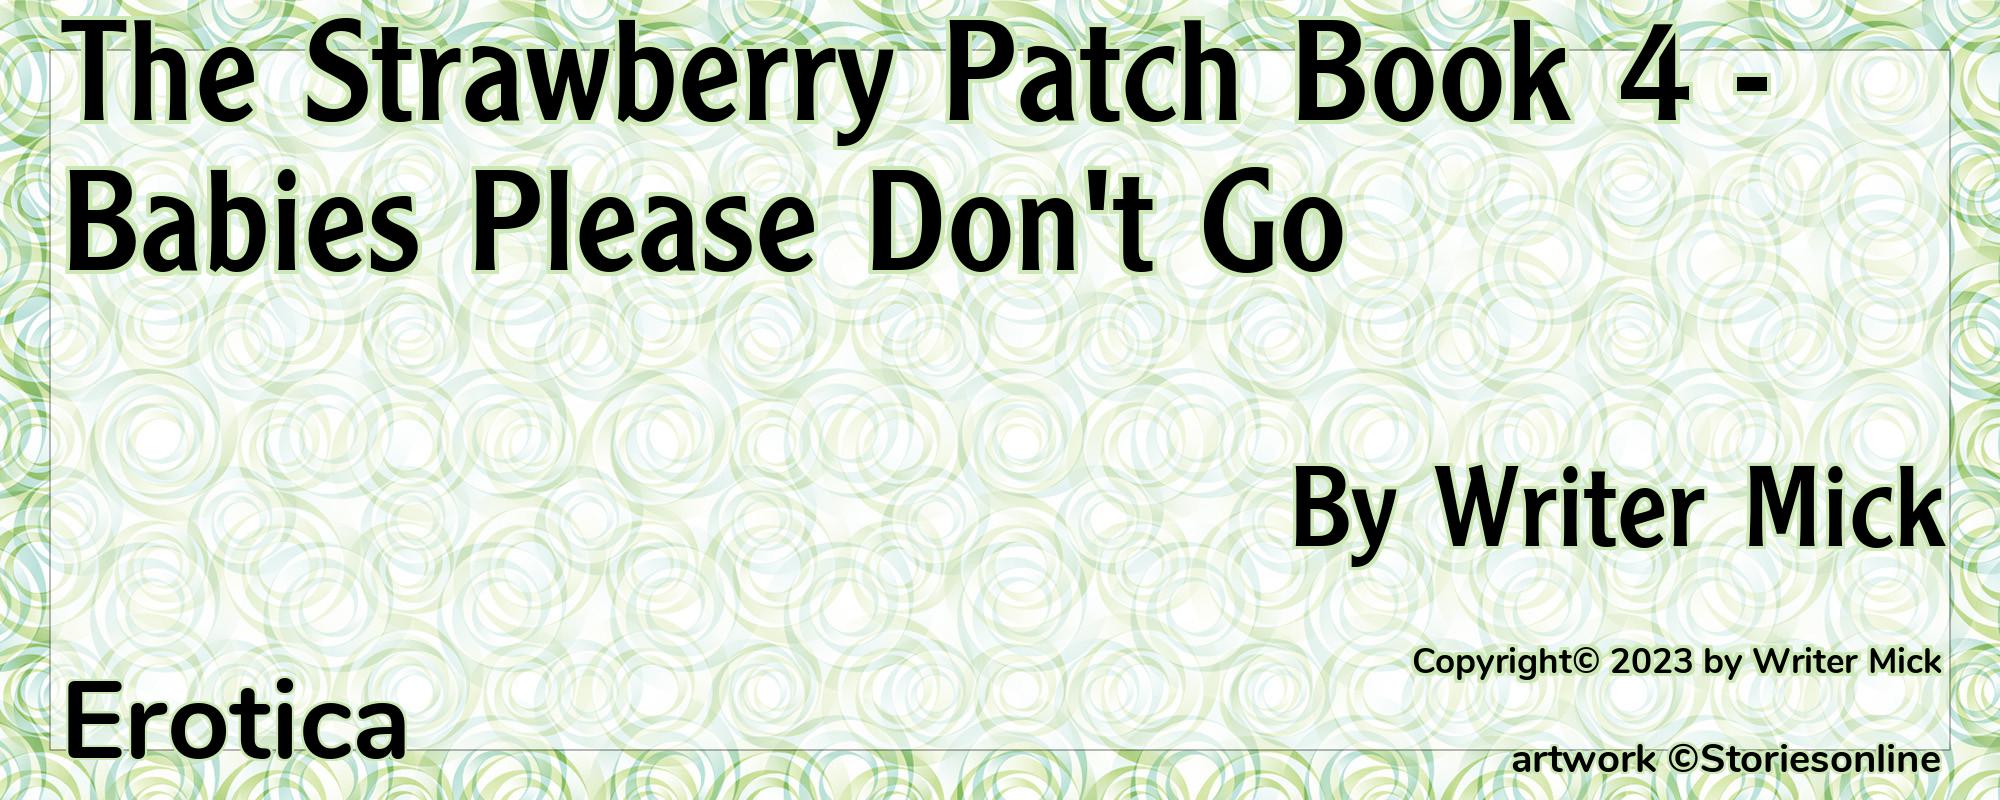 The Strawberry Patch Book 4 - Babies Please Don't Go - Cover